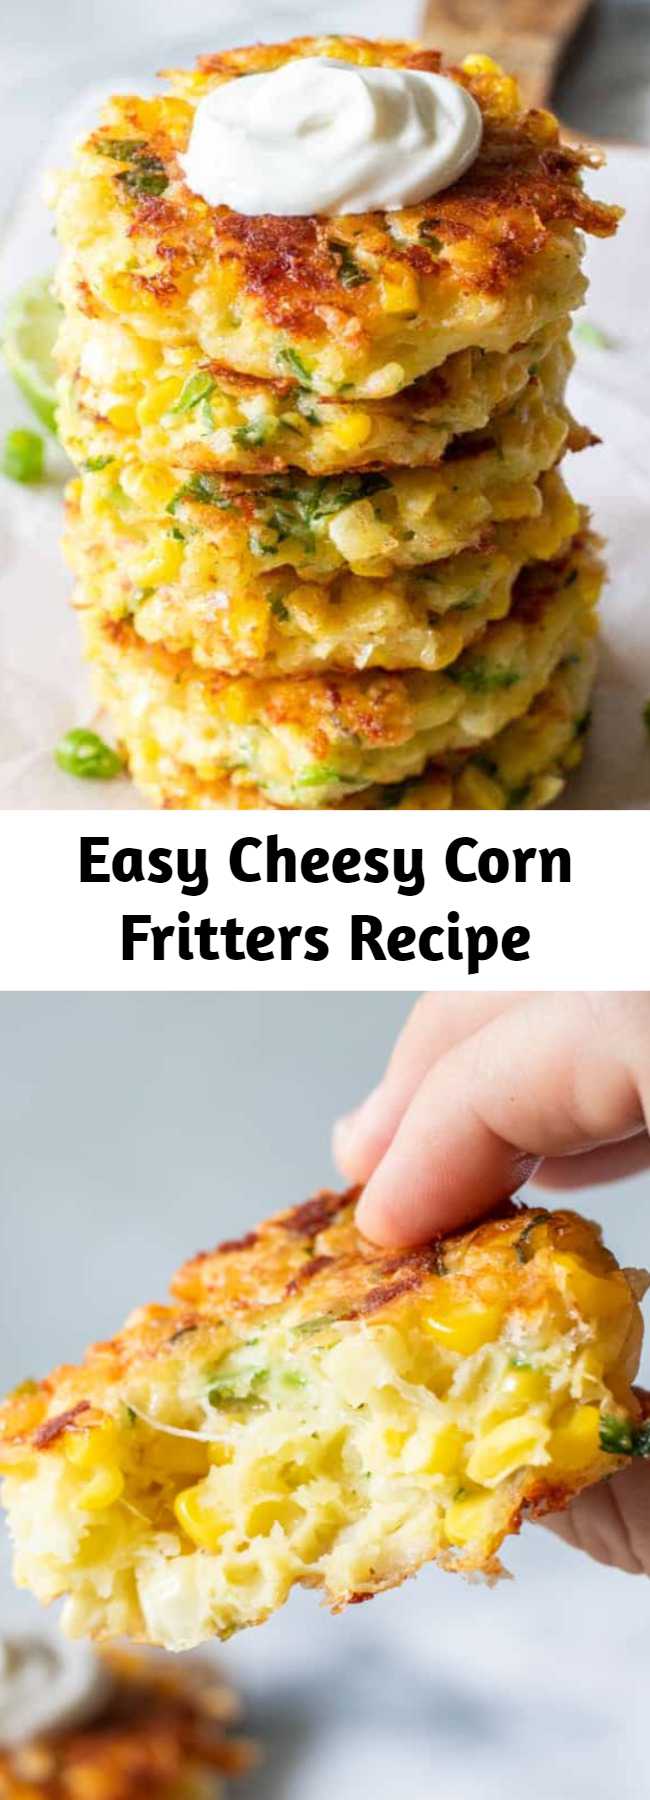 Easy Cheesy Corn Fritters Recipe - These easy to make fritters are loaded up with fresh corn, flavor, and most importantly cheese! Fried in a small amount of olive oil, these fritters are the perfect way to enjoy the flavors of summer! #cornfritters #appetizer #fritters